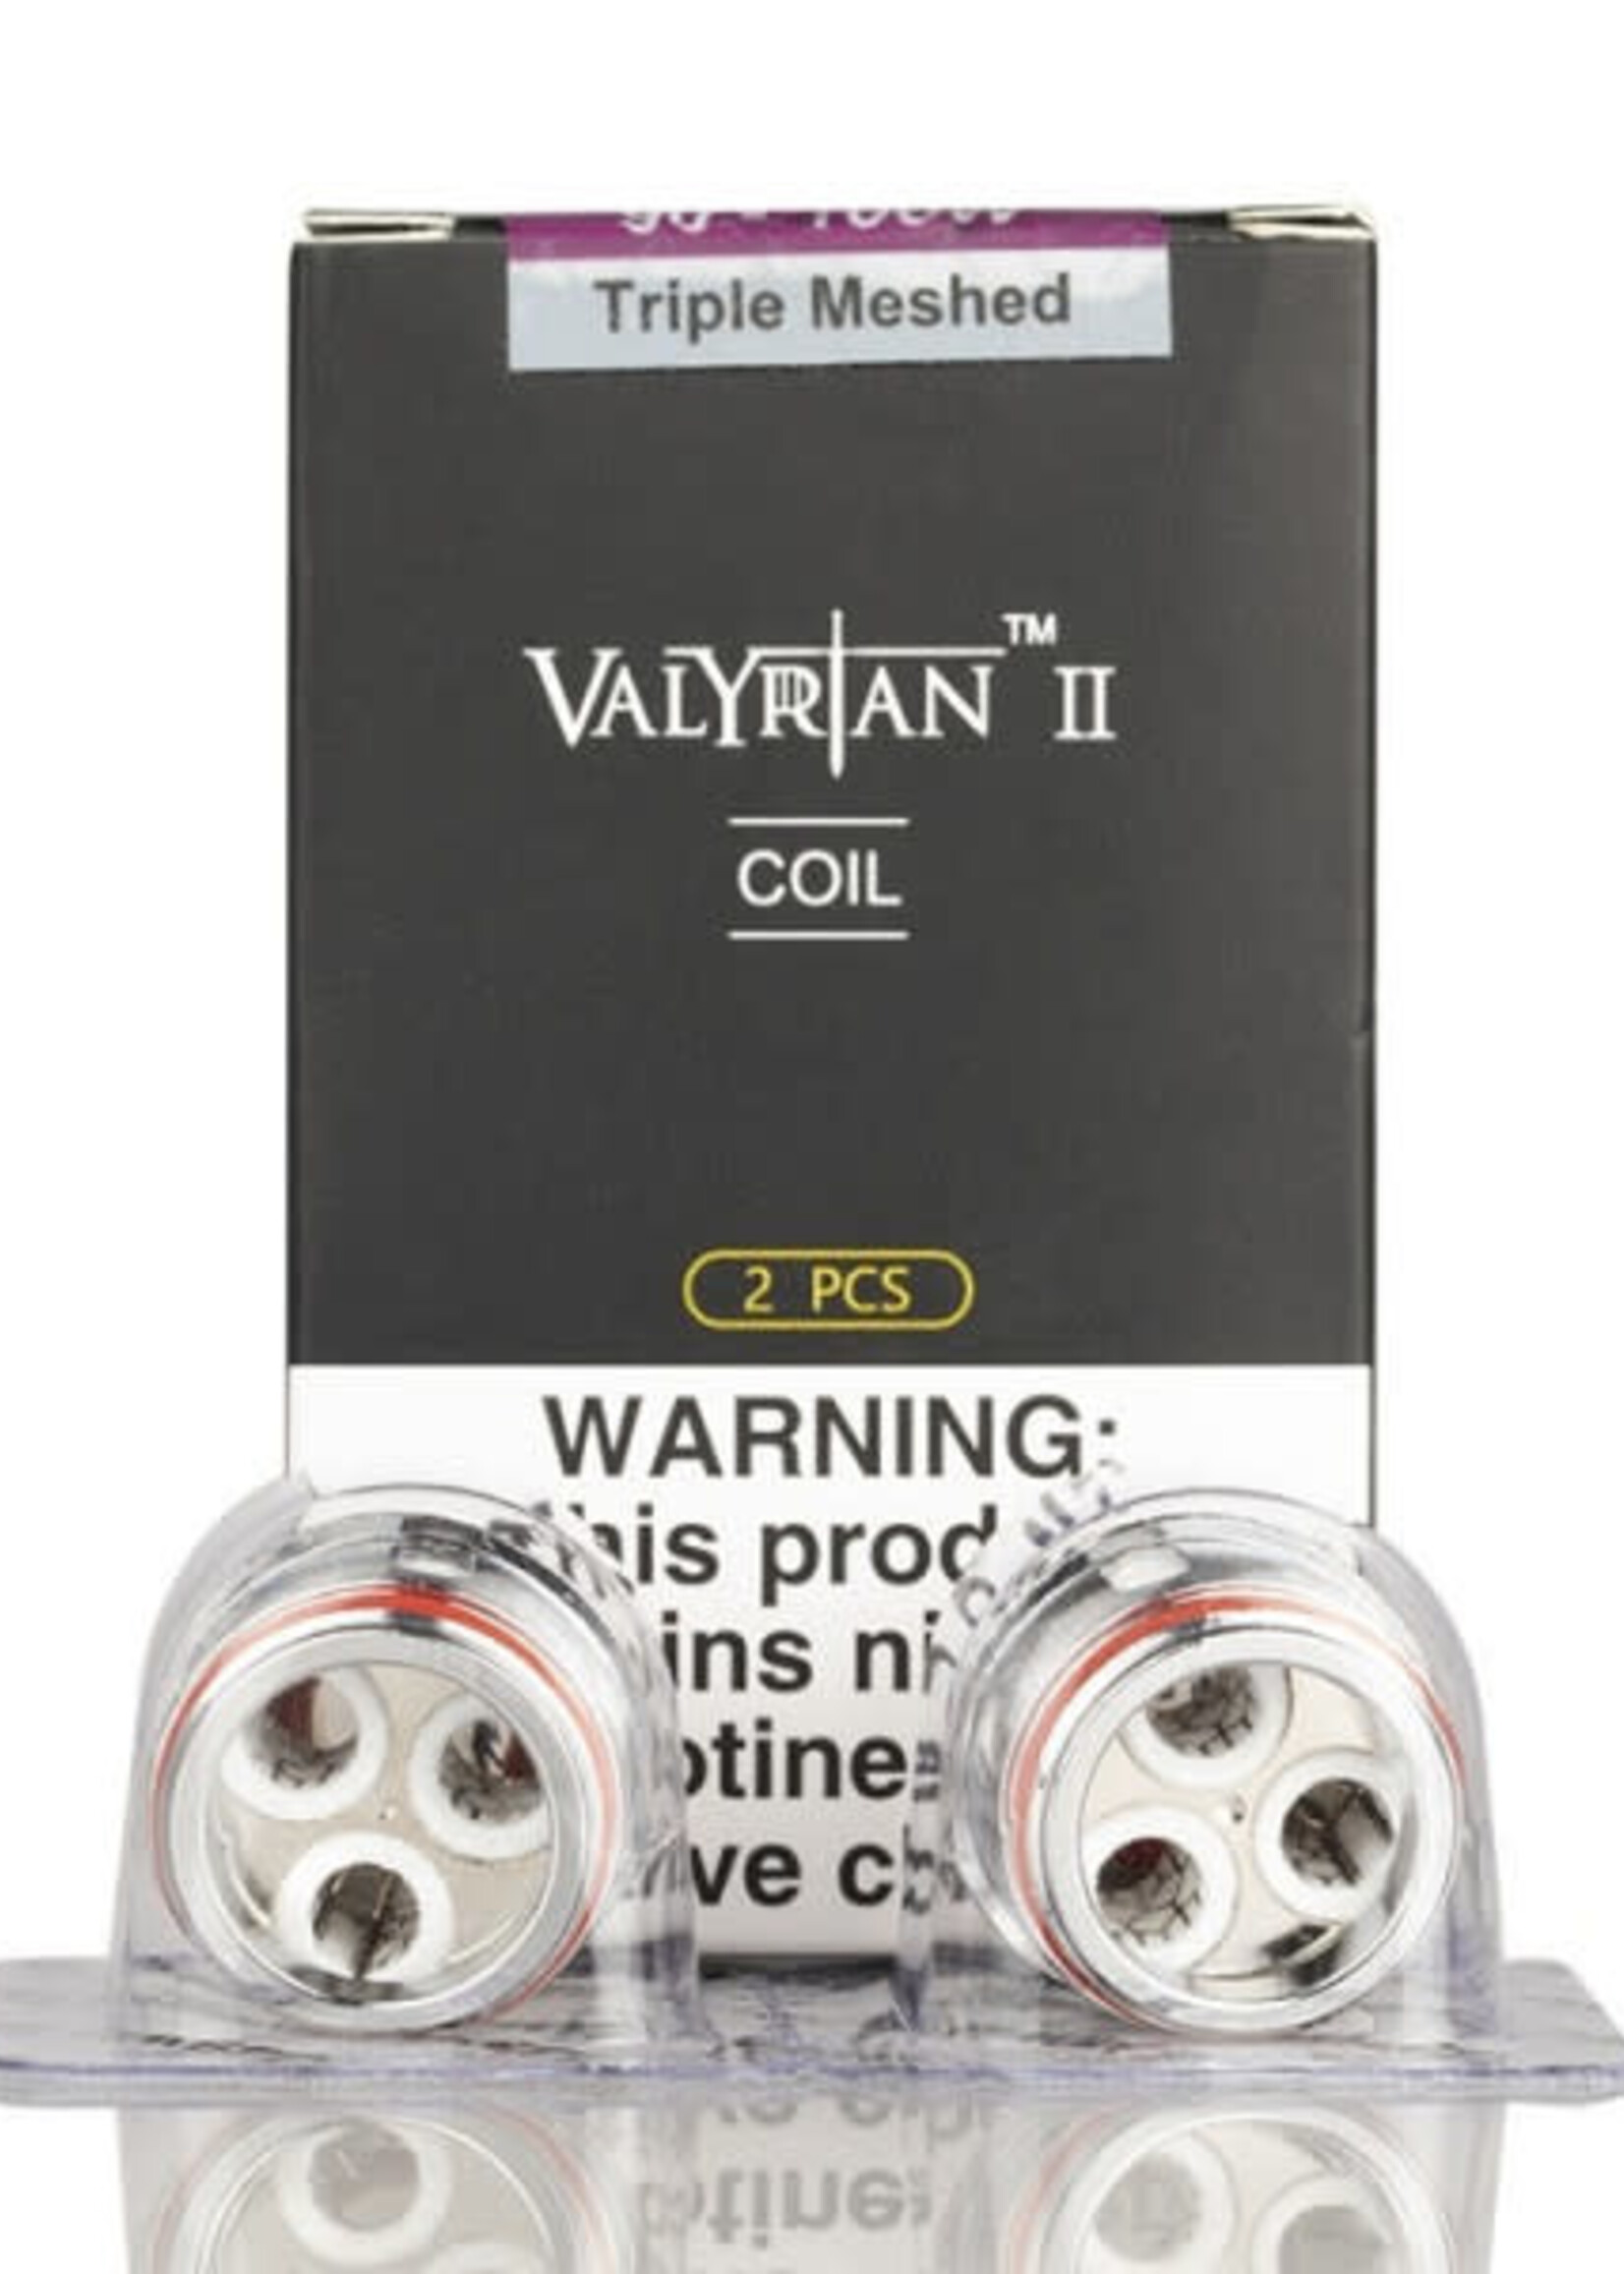 UWELL UWELL VALYRIAN 2 REPLACEMENT COILS